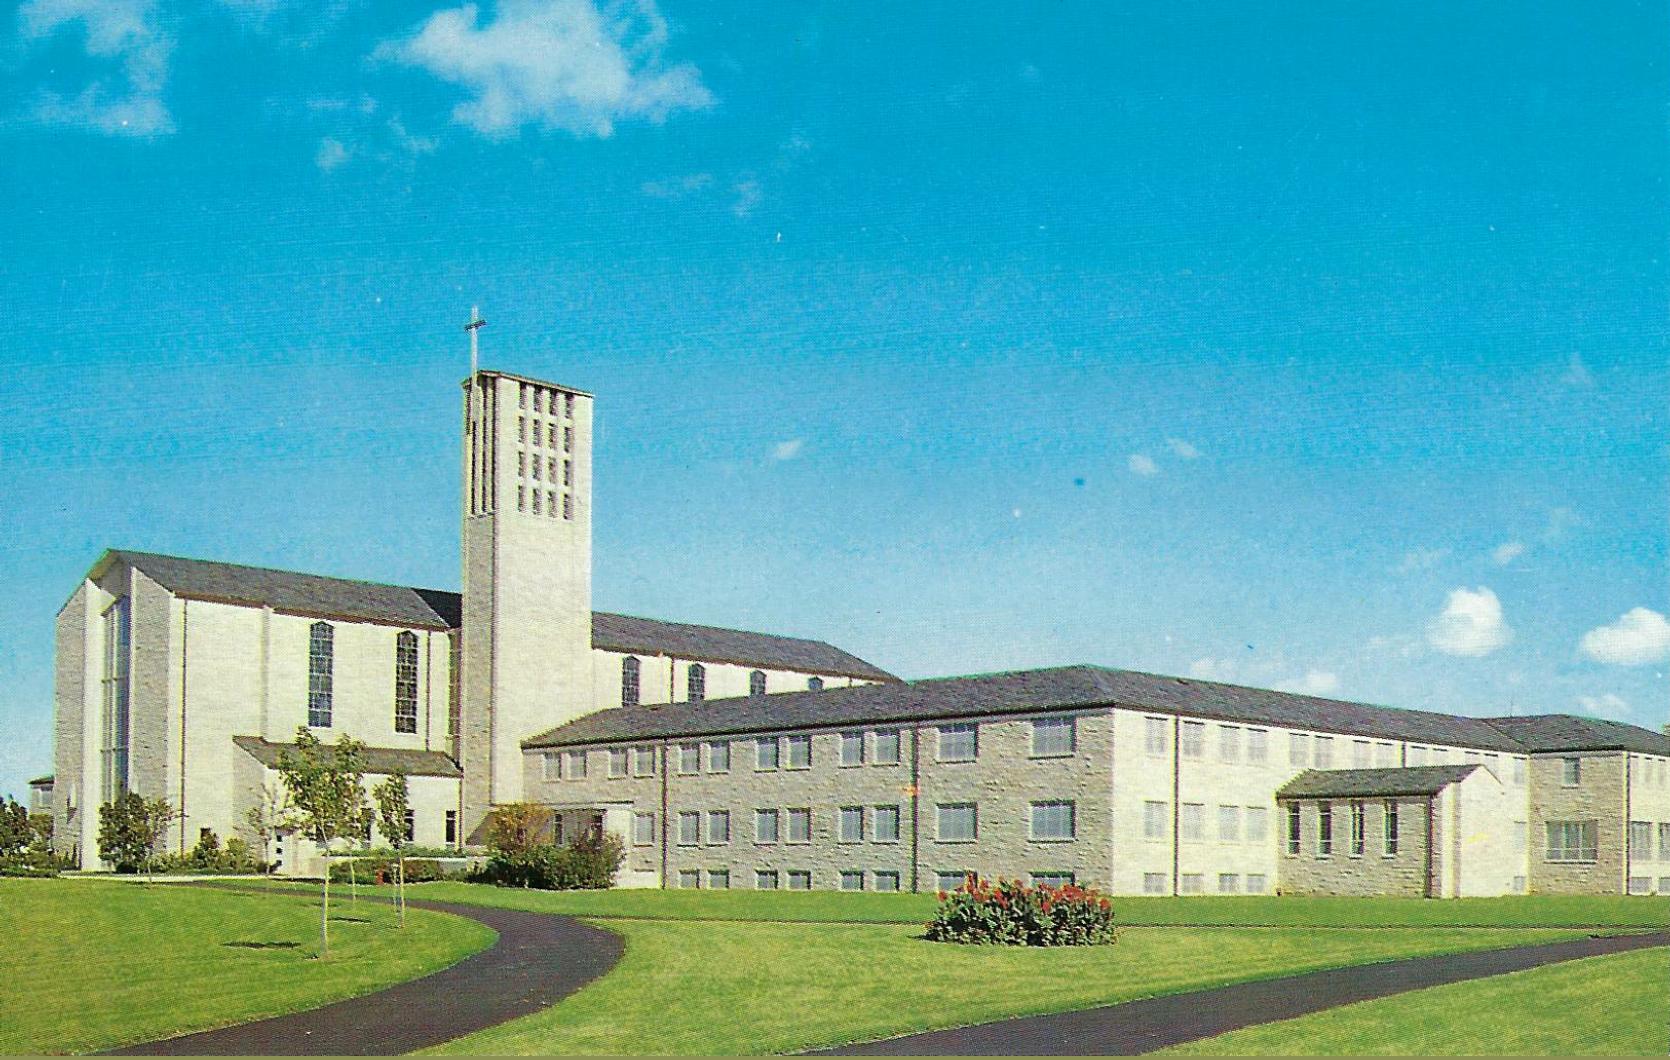 St. Norbert Abbey, grounds • UNKNOWN YEAR